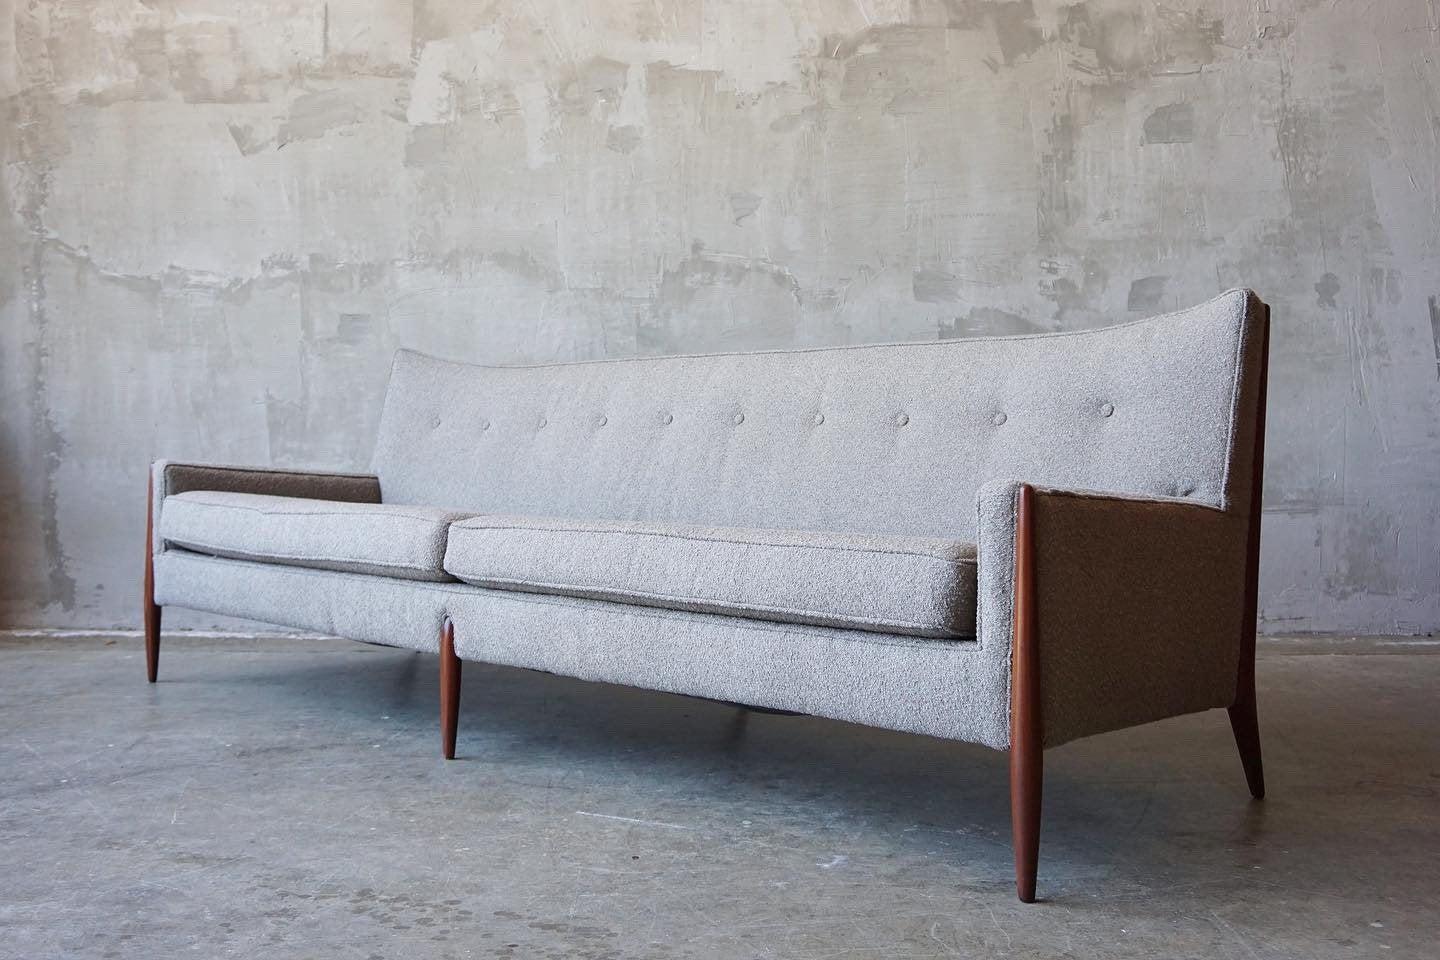 Beautifully designed and crafted sofa by Jules Heumann for Metropolitan Furniture, circa 1960s.

Featuring sculpted walnut legs and covered in a warm grey bouclé. 

Excellent condition as photographed. 

Measures: 92” W x 31” D x 31.5”